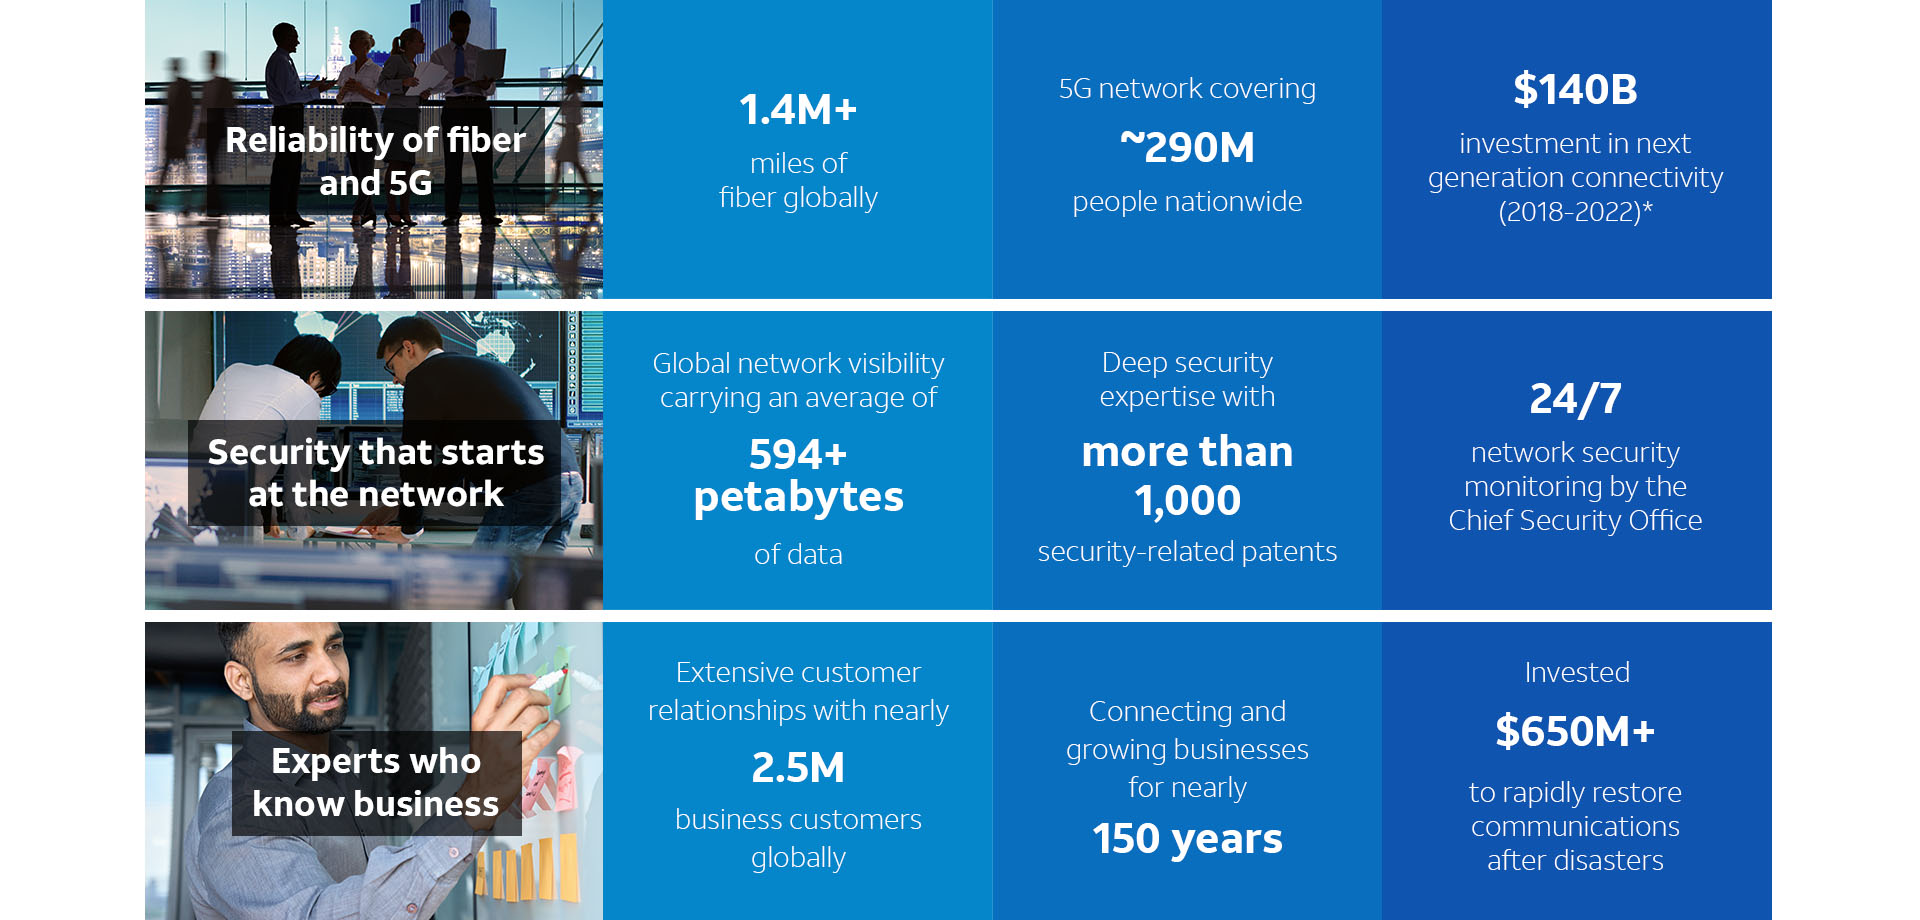 Graphic stat image conveying 5G network covering ~290M people nationwide, 24/7 network security monitoring by the Chief Security Officer, and extensive customer relationships with nearly 2.5M business customers globally. 